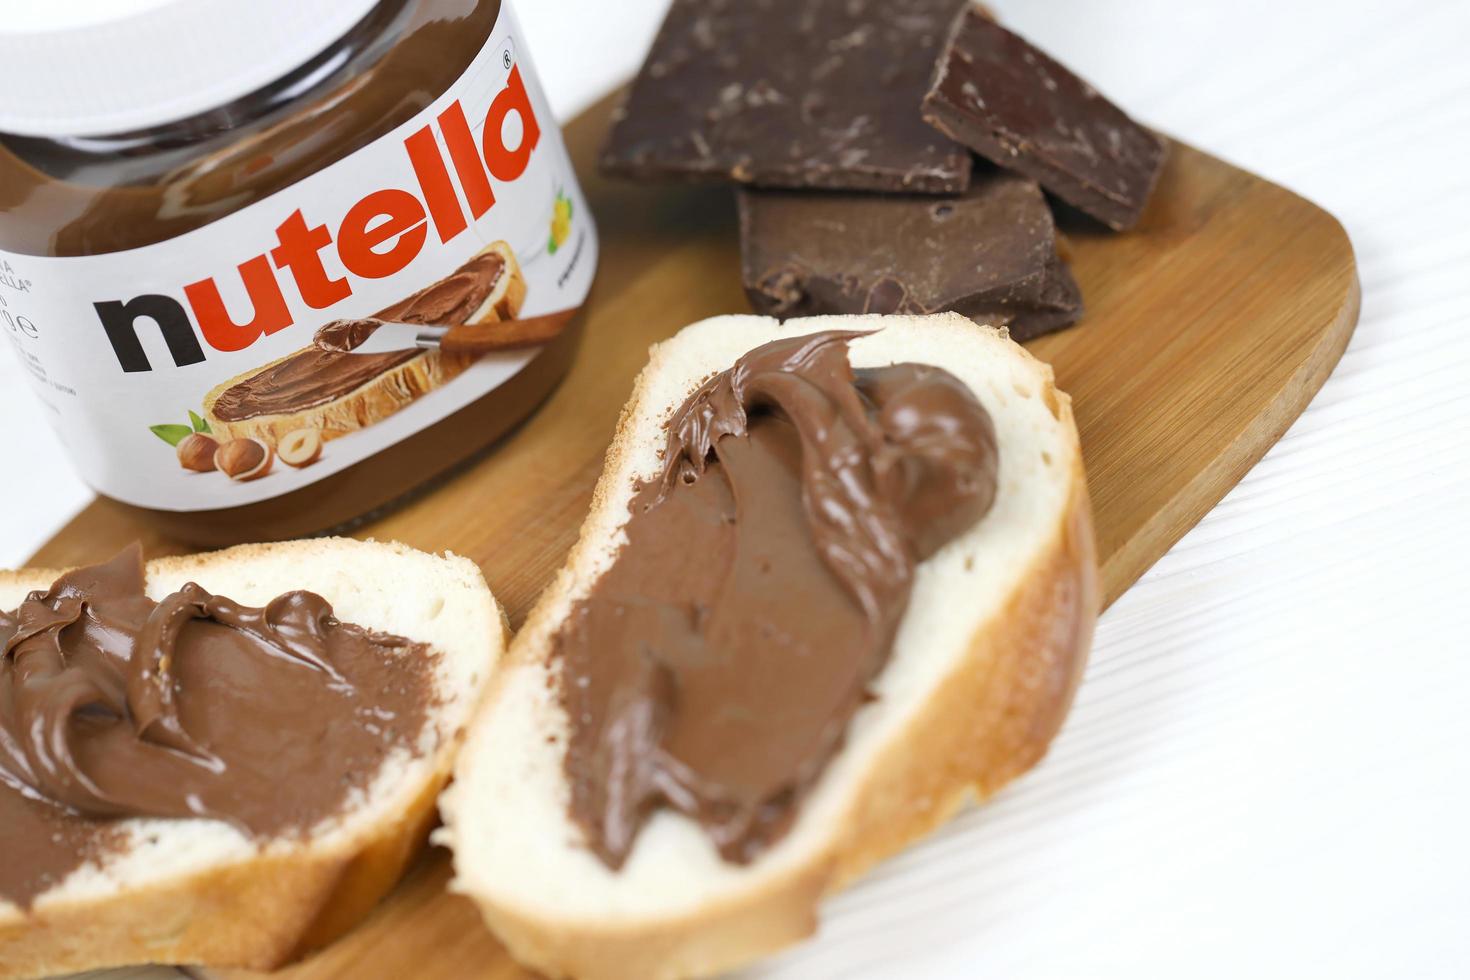 KHARKOV, UKRAINE - DECEMBER 27, 2020 Nutella glass can and spread on freshly baked bread. Nutella is manufactured by Italian company Ferrero first introduced in 1964 photo